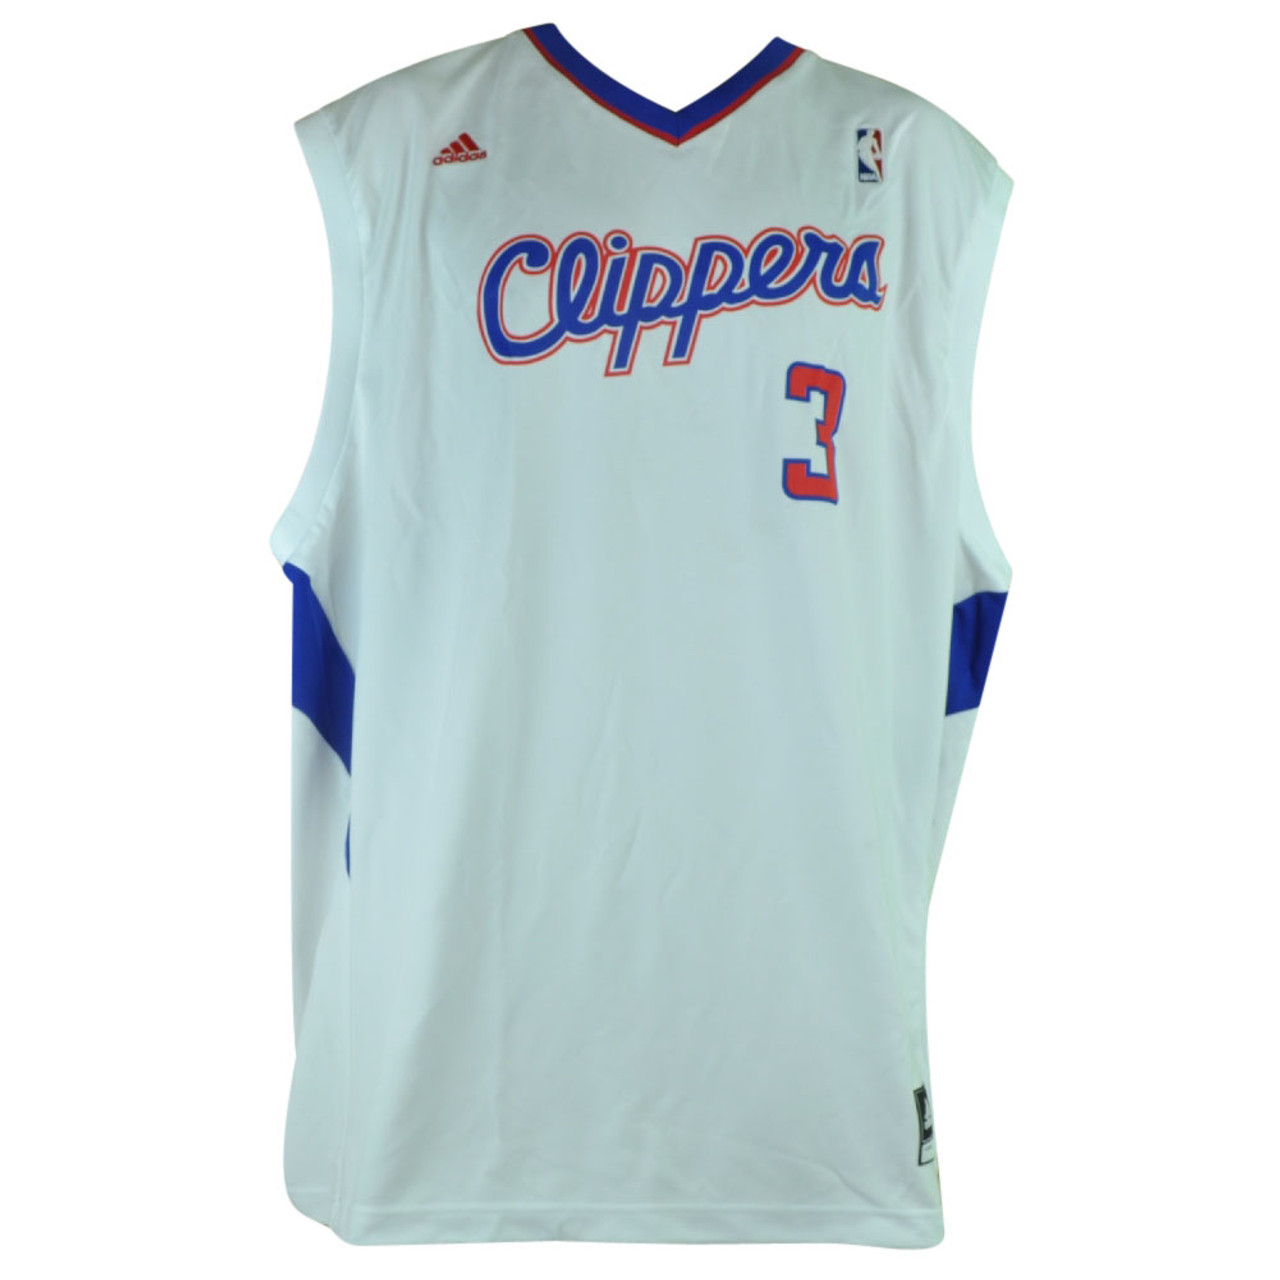 chris paul jersey clippers